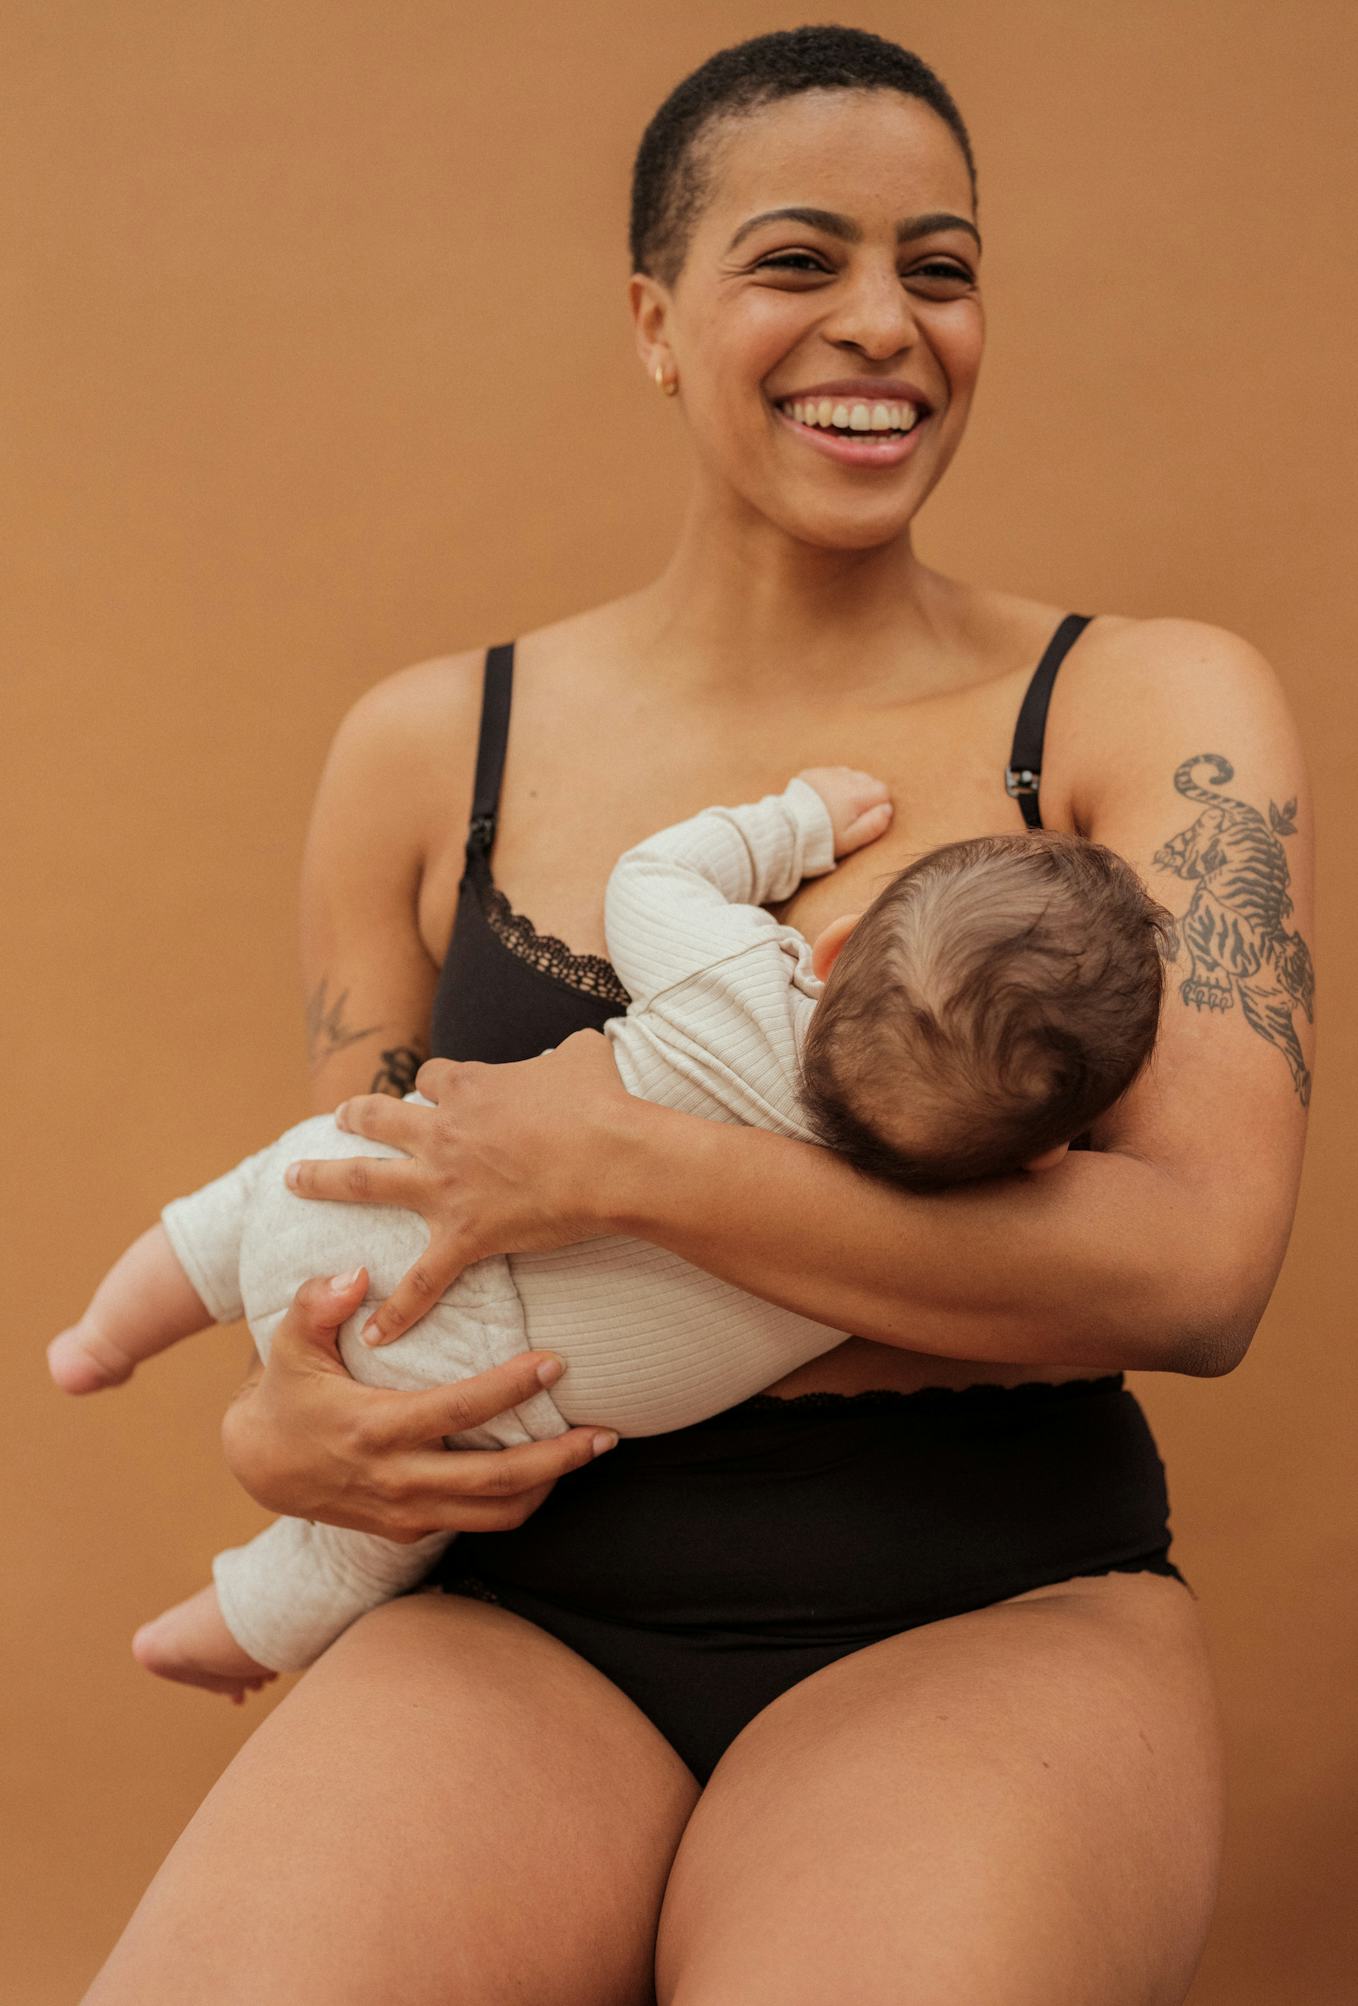 Aurélie is carrying a baby and is wearing the lingerie set Une chanson douce in black 